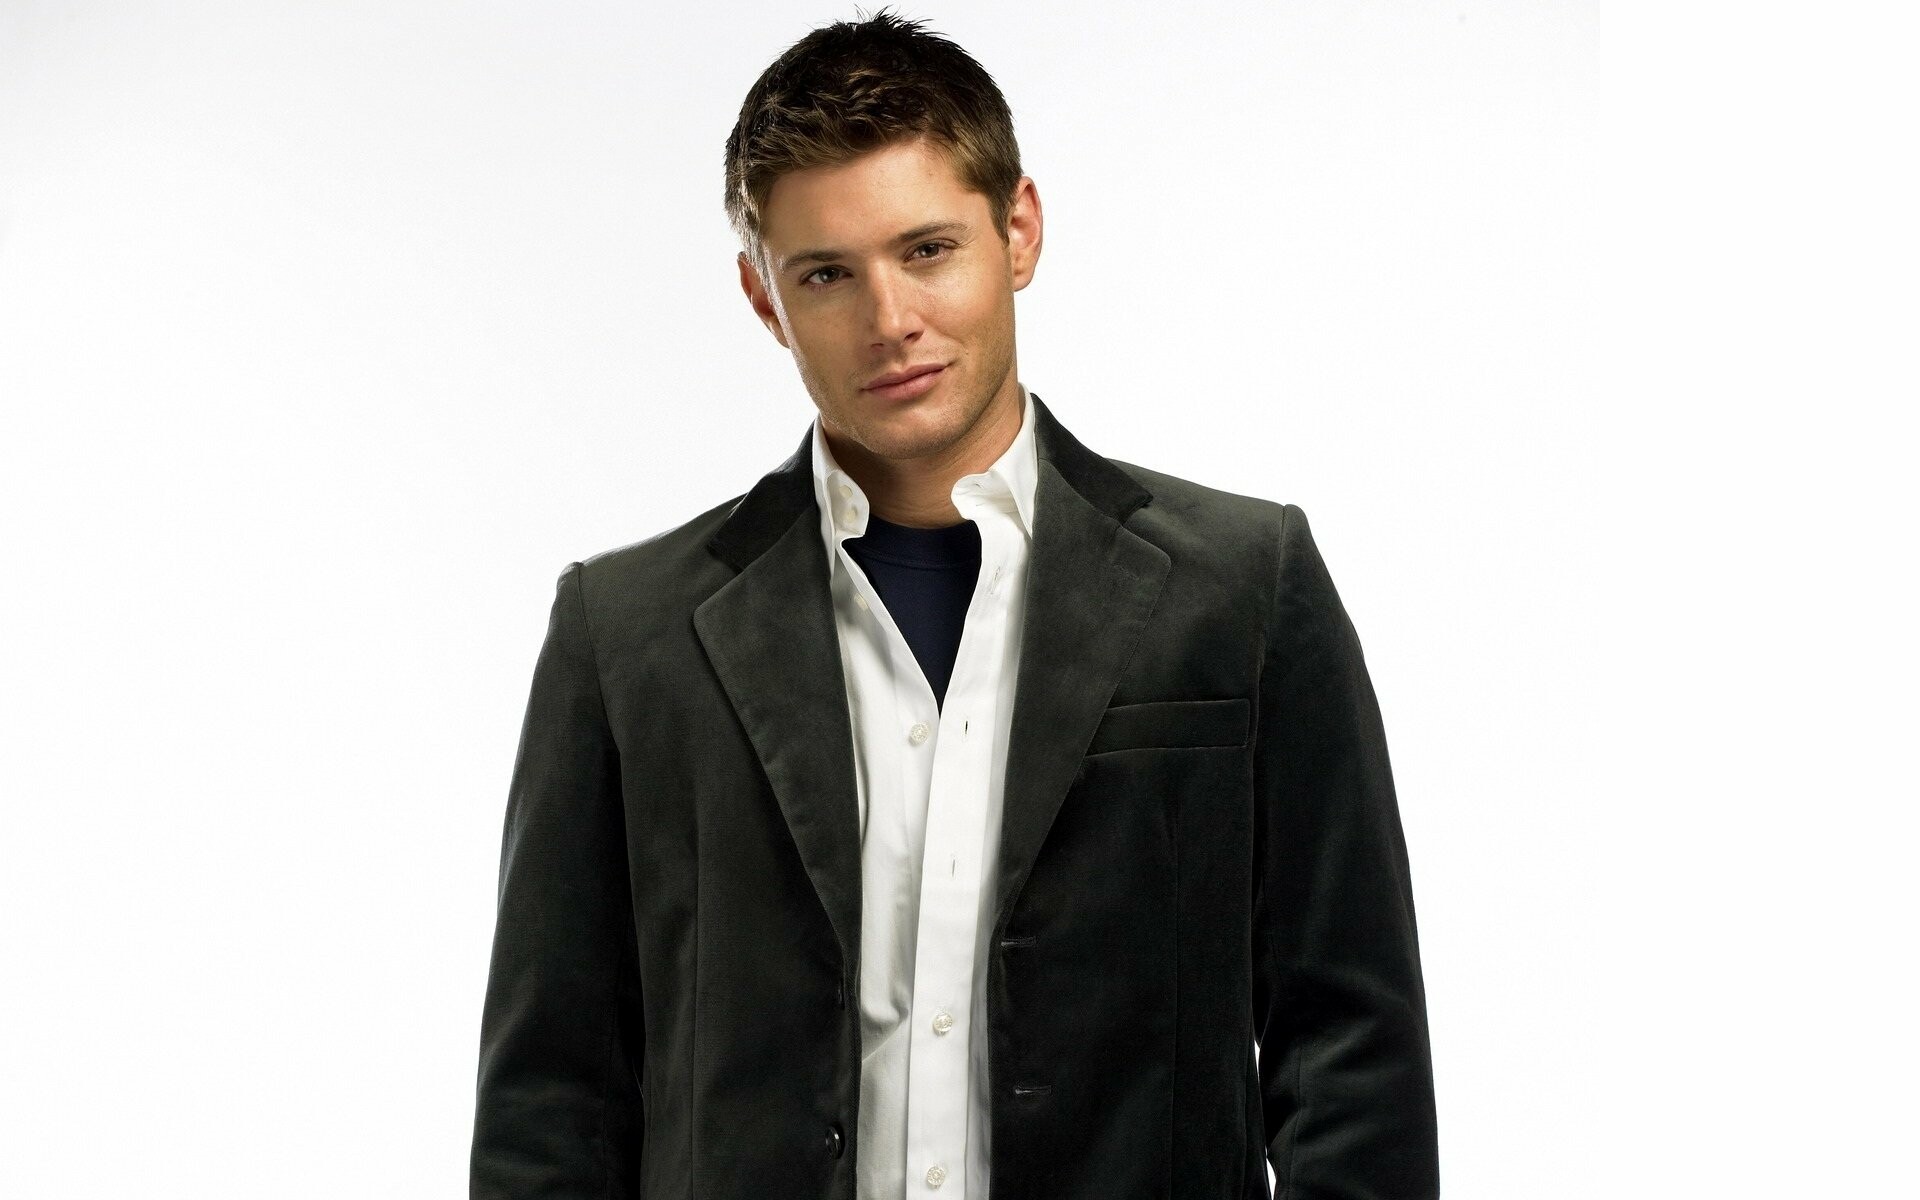 Jensen Ackles: Was cast to play U.S. Marshal Wood Helm in the Western feature Rust. 1920x1200 HD Background.